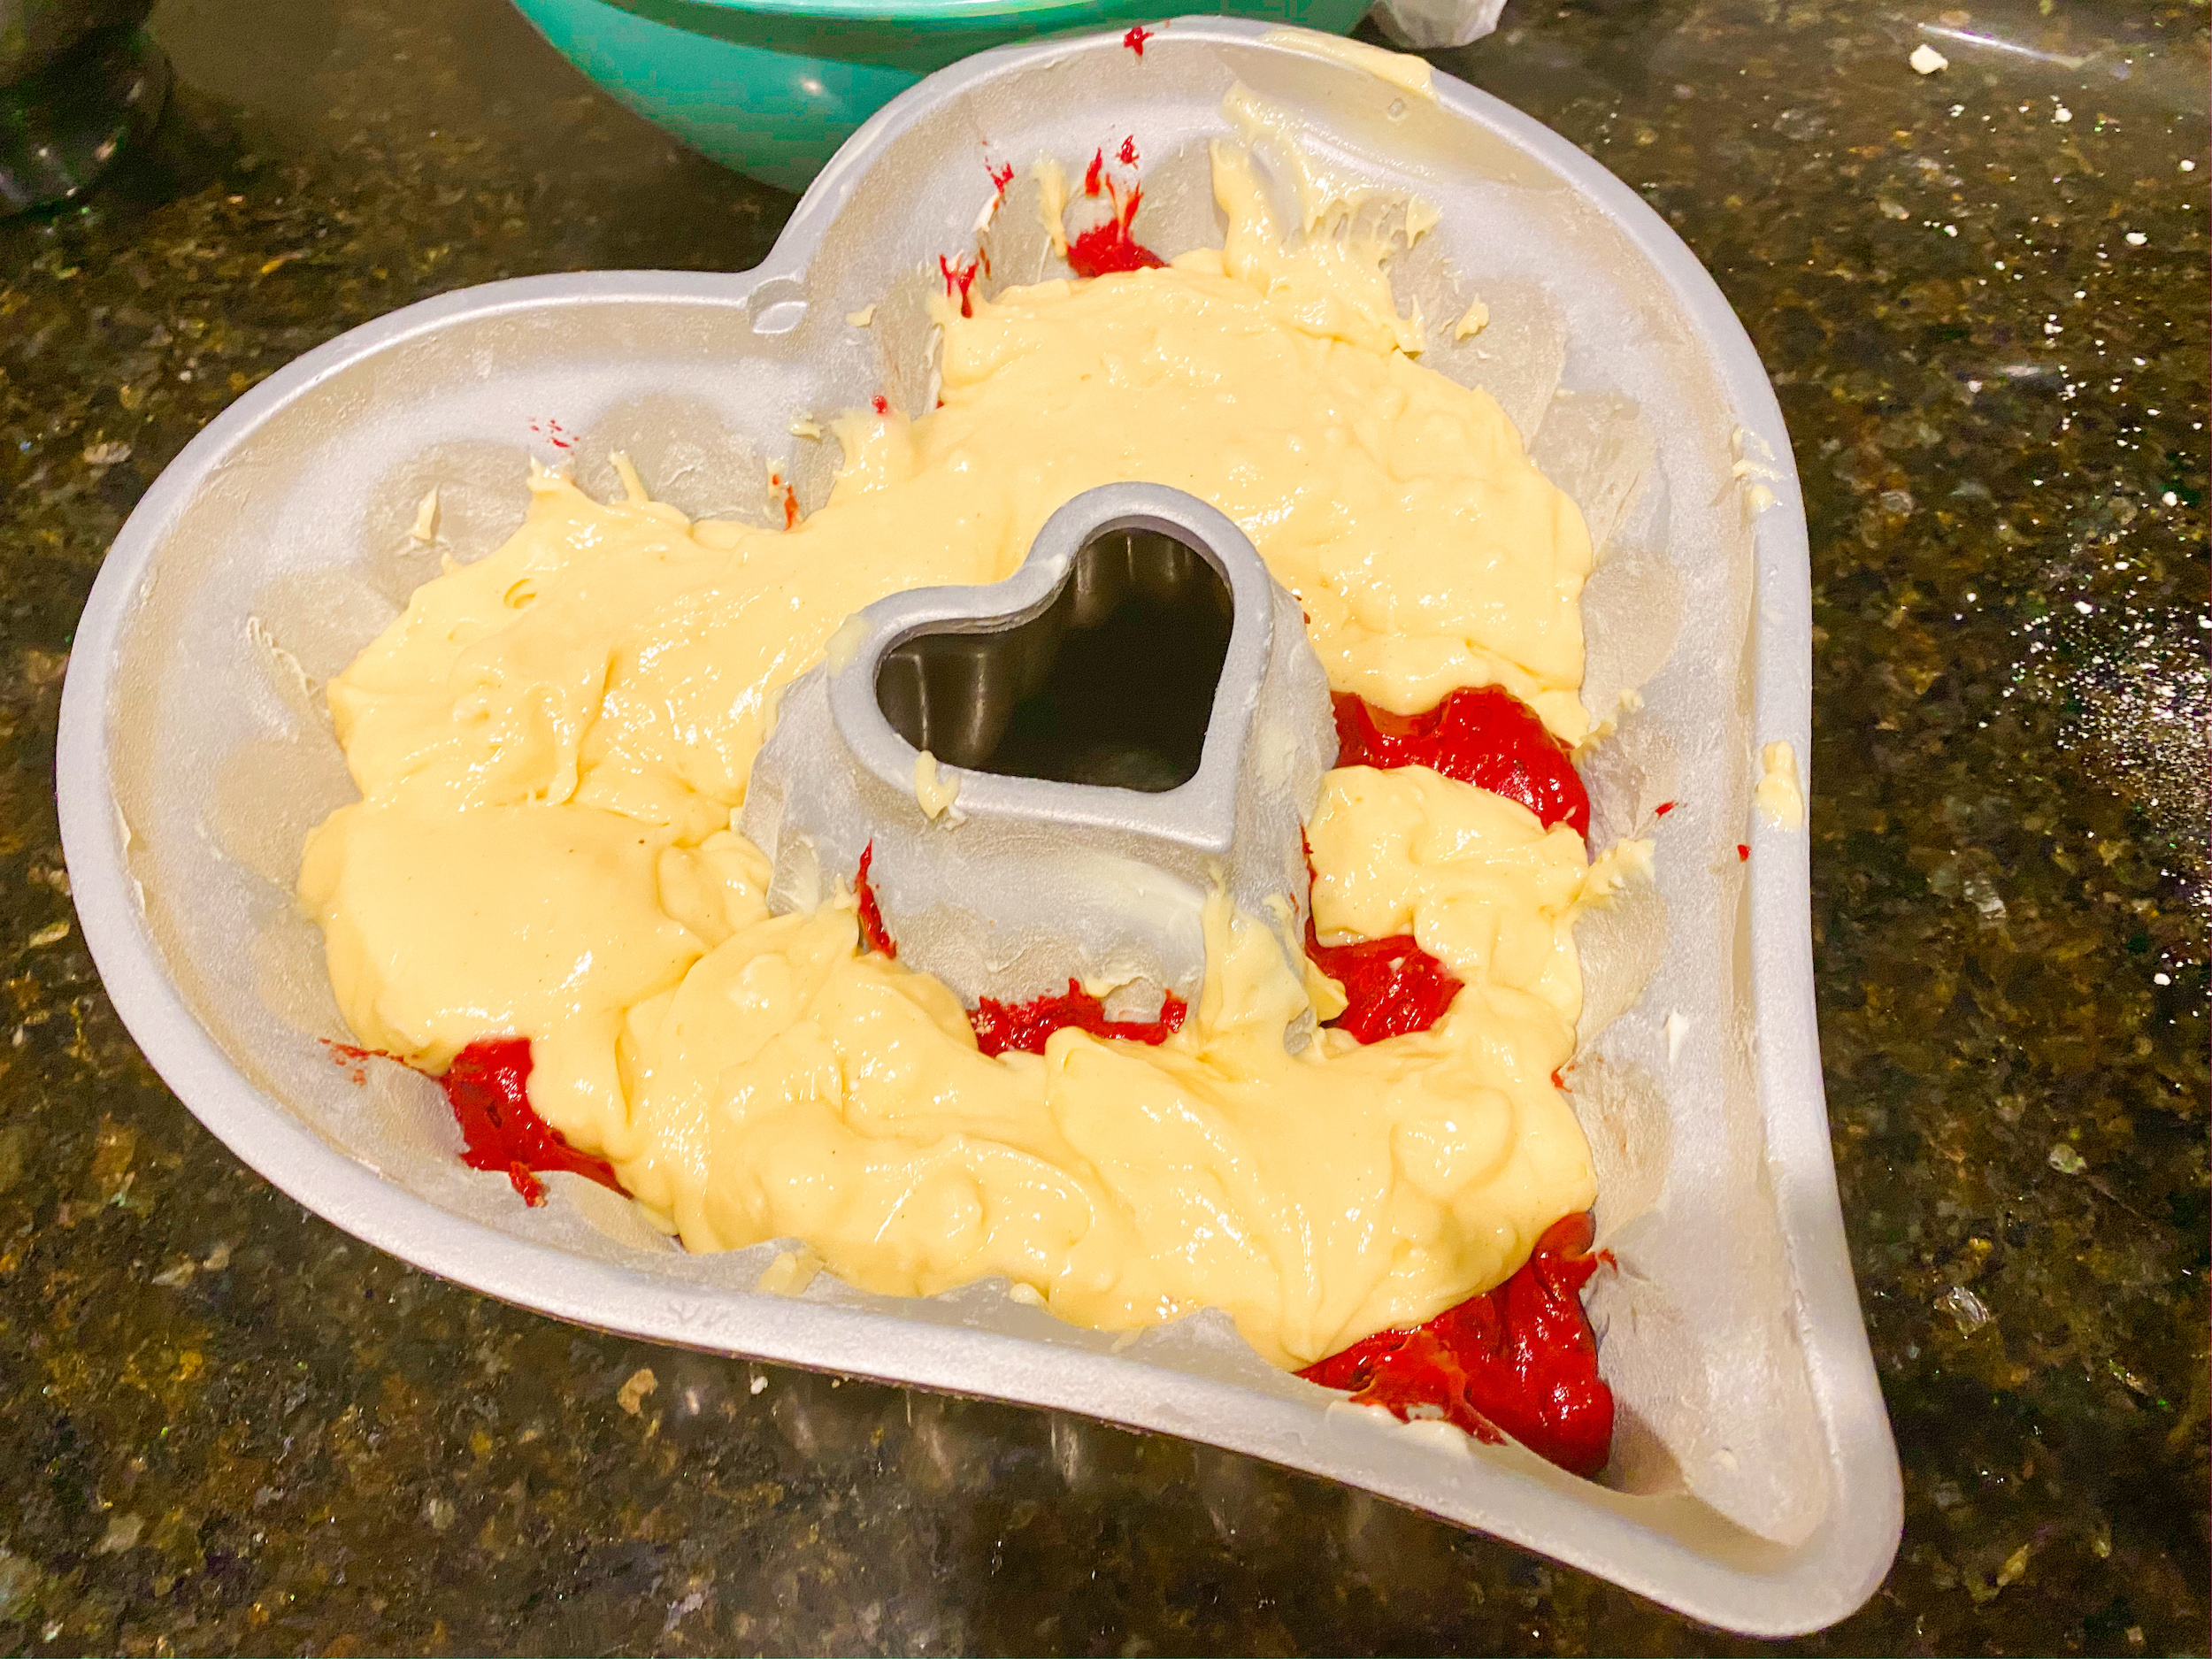 Layered red velvet and yellow bundt cake mix in a heart shaped bundt cake pan. 